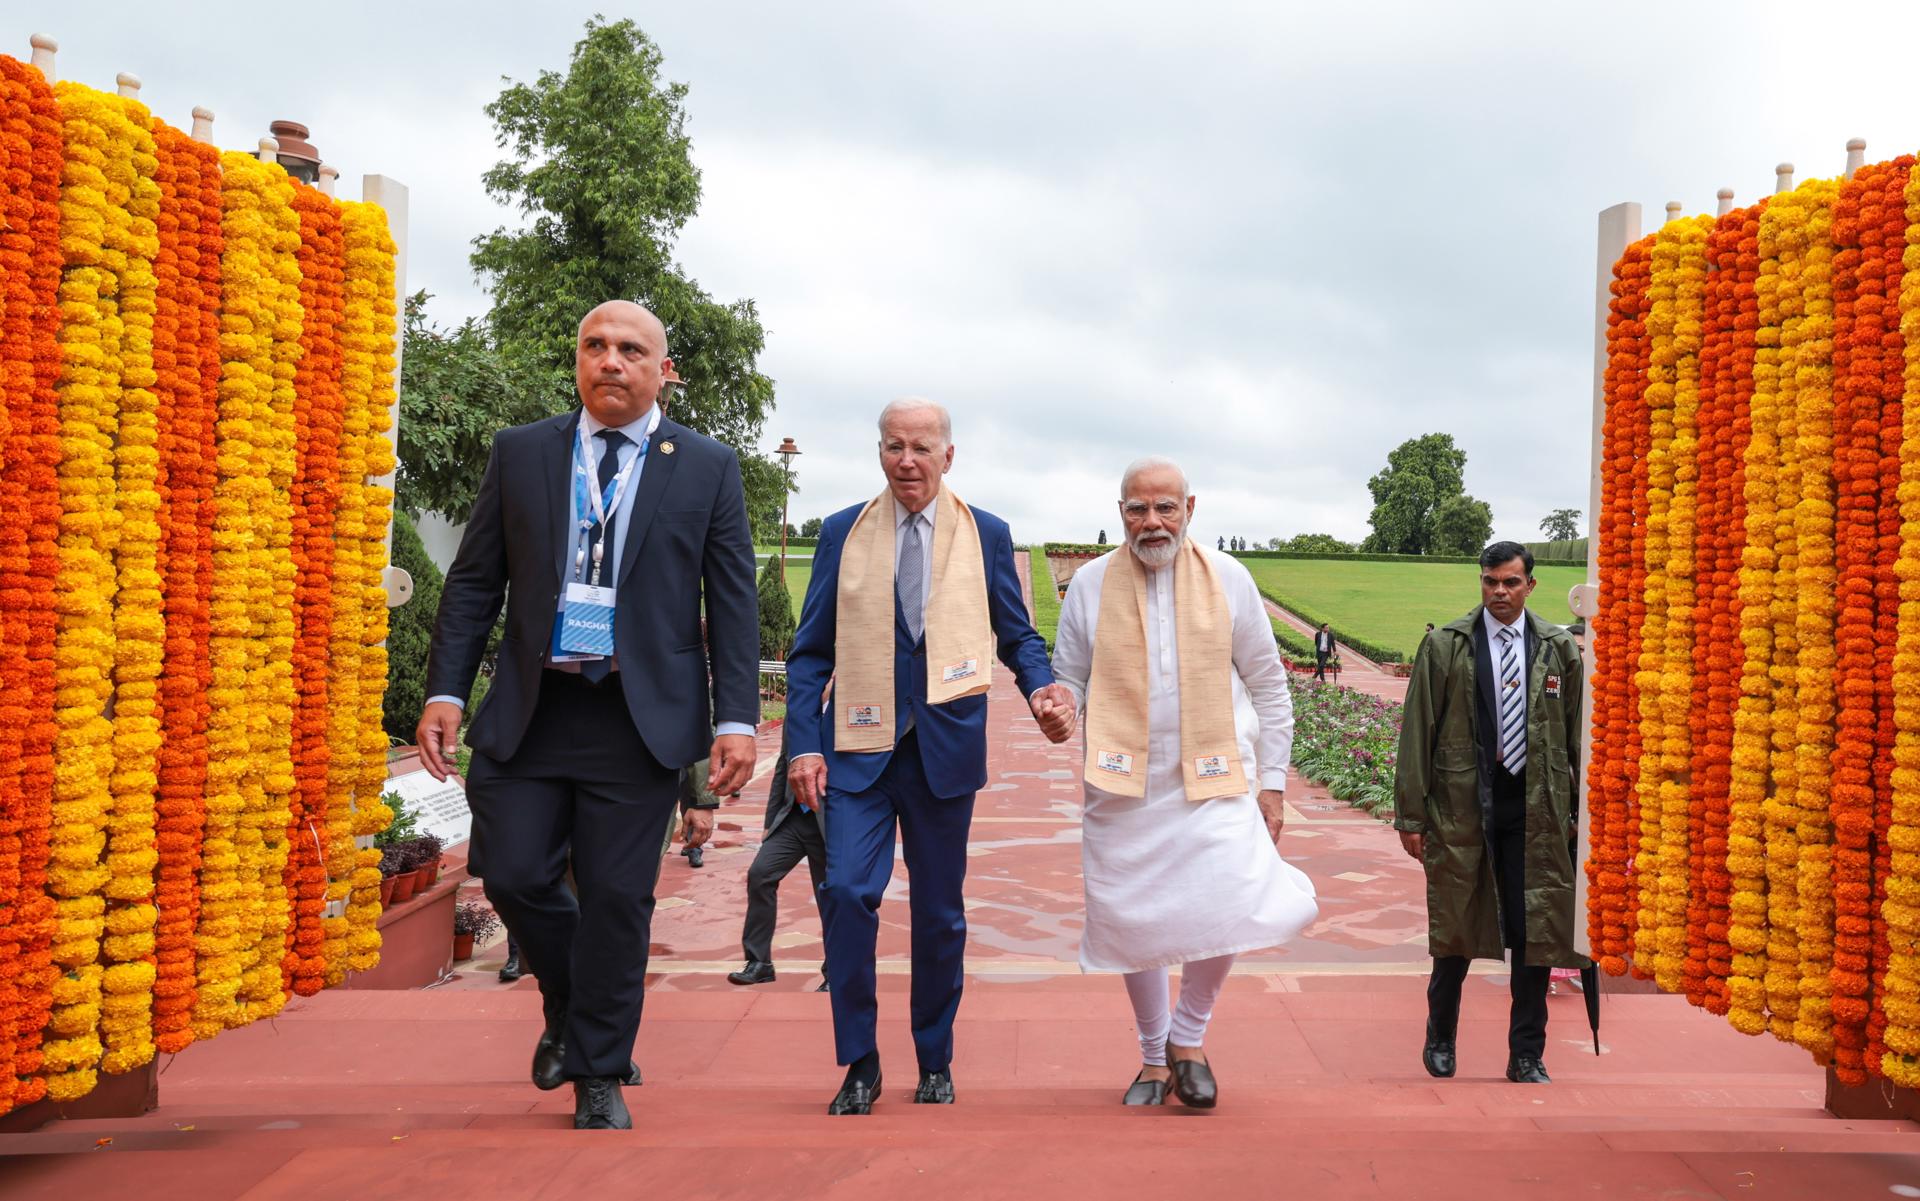 A handout photo made available by the Indian Press Information Bureau (PIB) shows Indian Prime Minister Narendra Modi (C-R) walking with US President Joe Biden (C-L) upon arrival at the Mahatma Gandhi's memorial in Rajghat, New Delhi, India, 10 September 2023. EFE/EPA/INDIA PRESS INFORMATION BUREAU HANDOUT EDITORIAL USE ONLY/NO SALES
